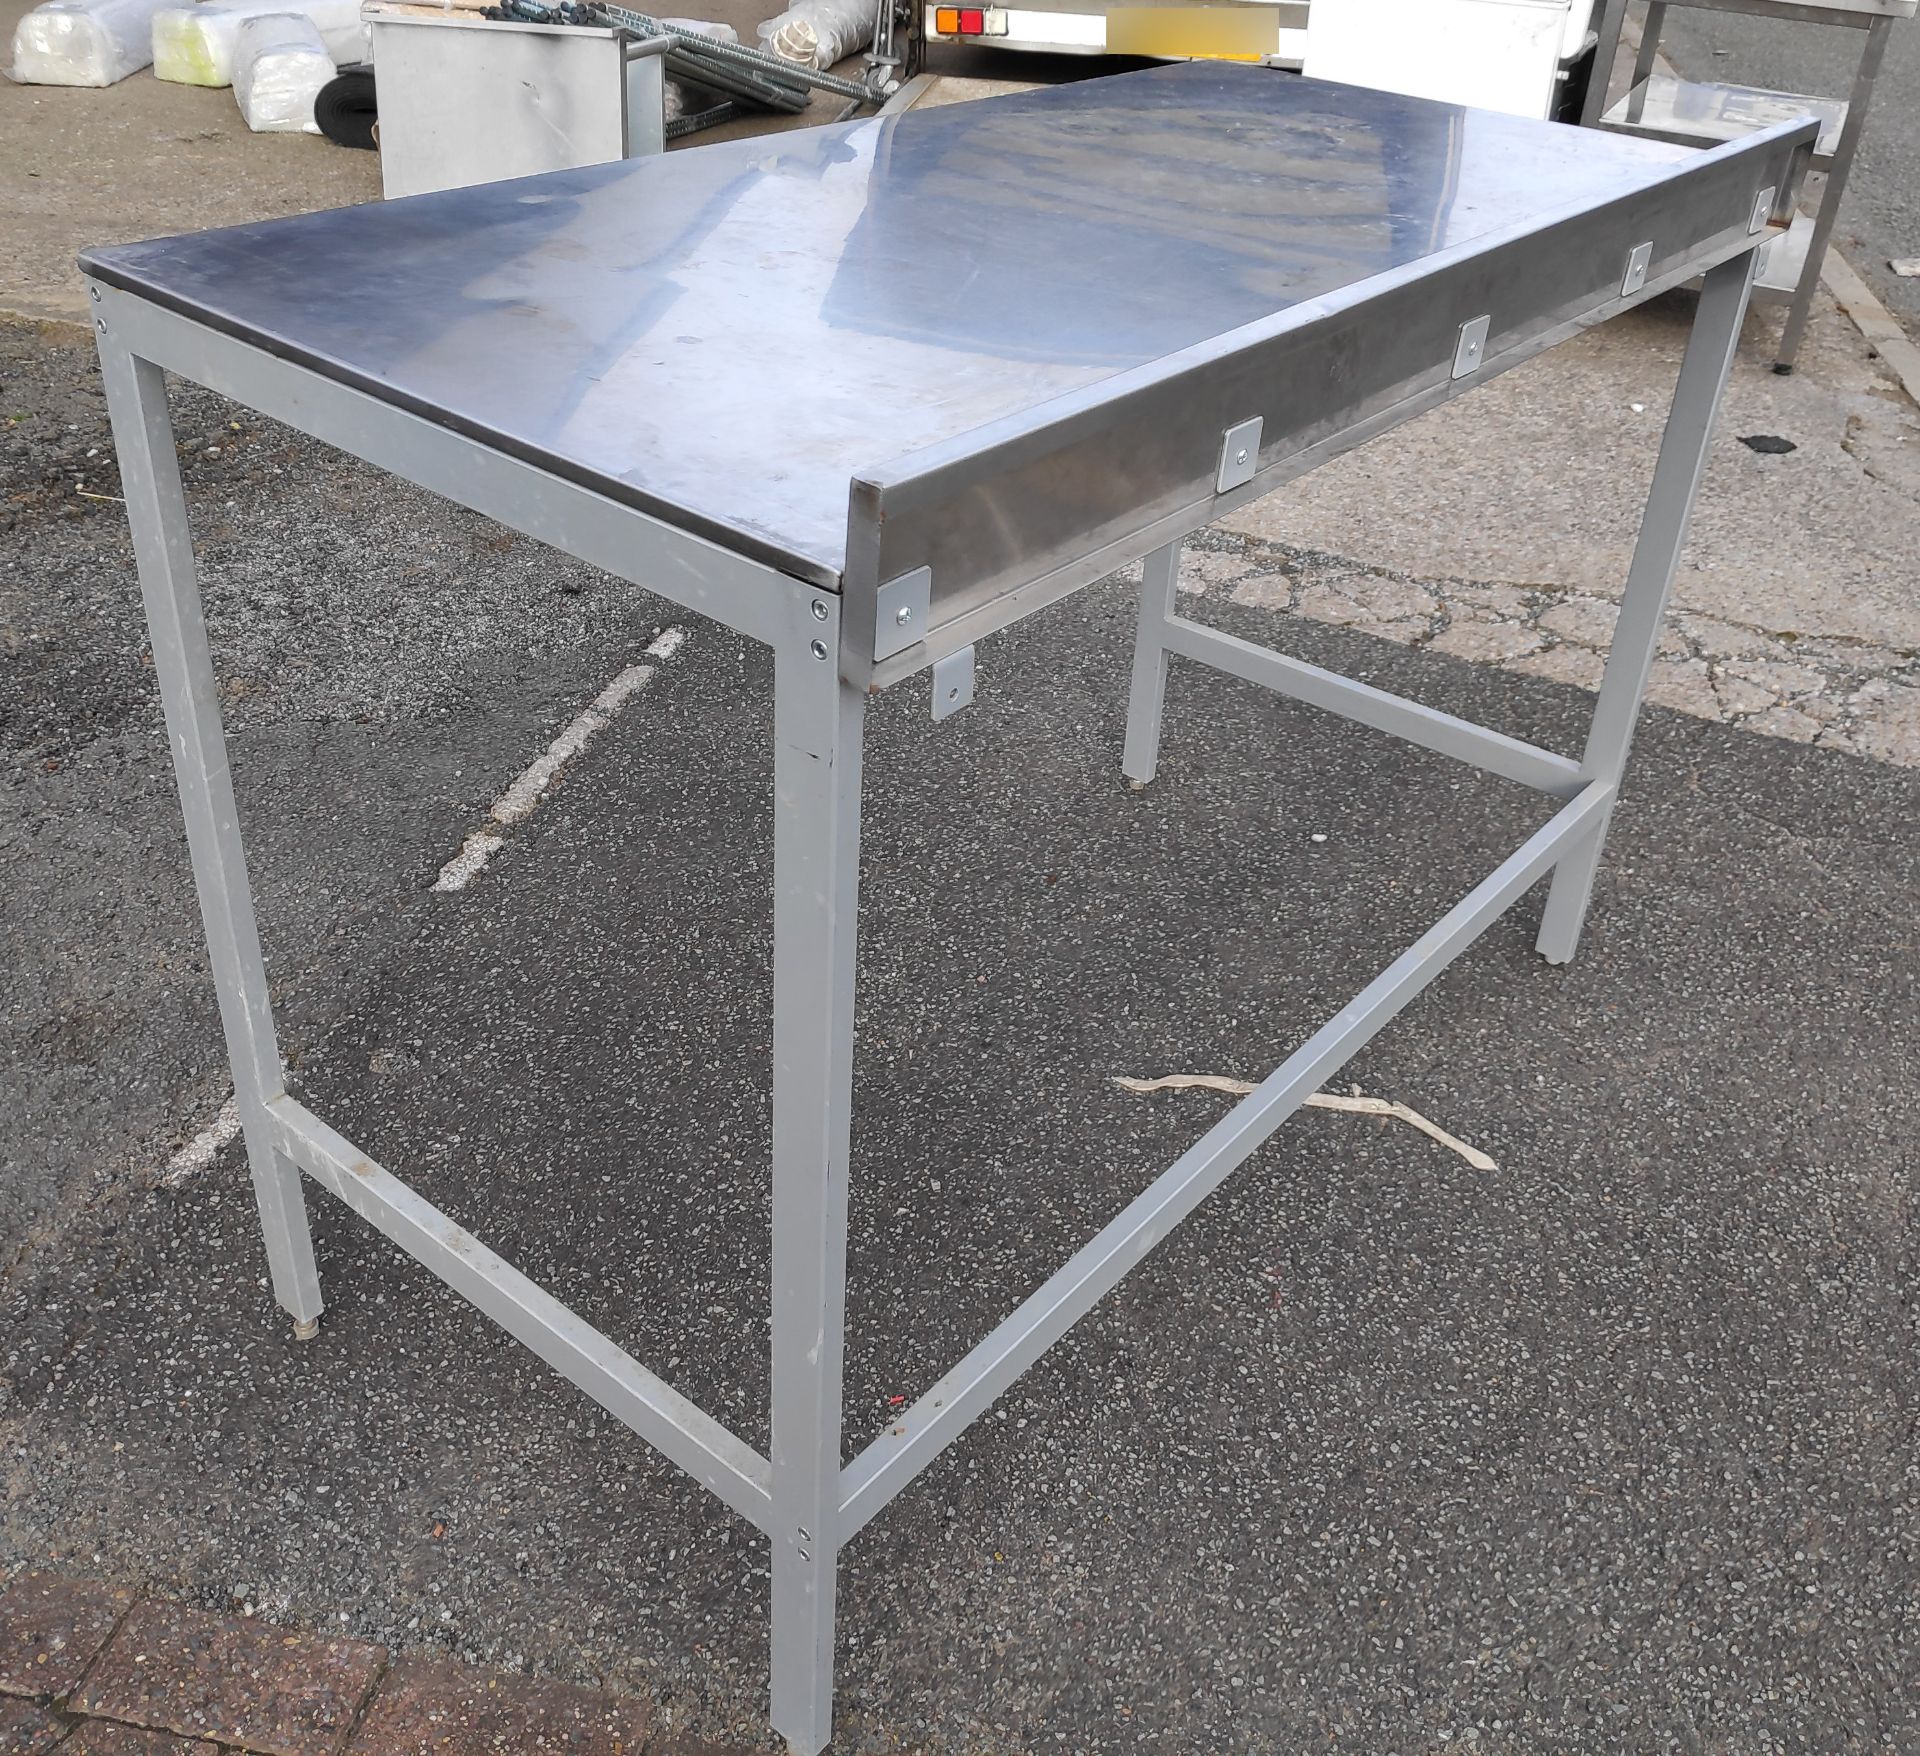 1 x Stainless Steel Prep Bench with Upstand - 126cm (L) x 64.5cm (D) x 95cm (H) - JMCS107 - CL723 - - Image 3 of 7